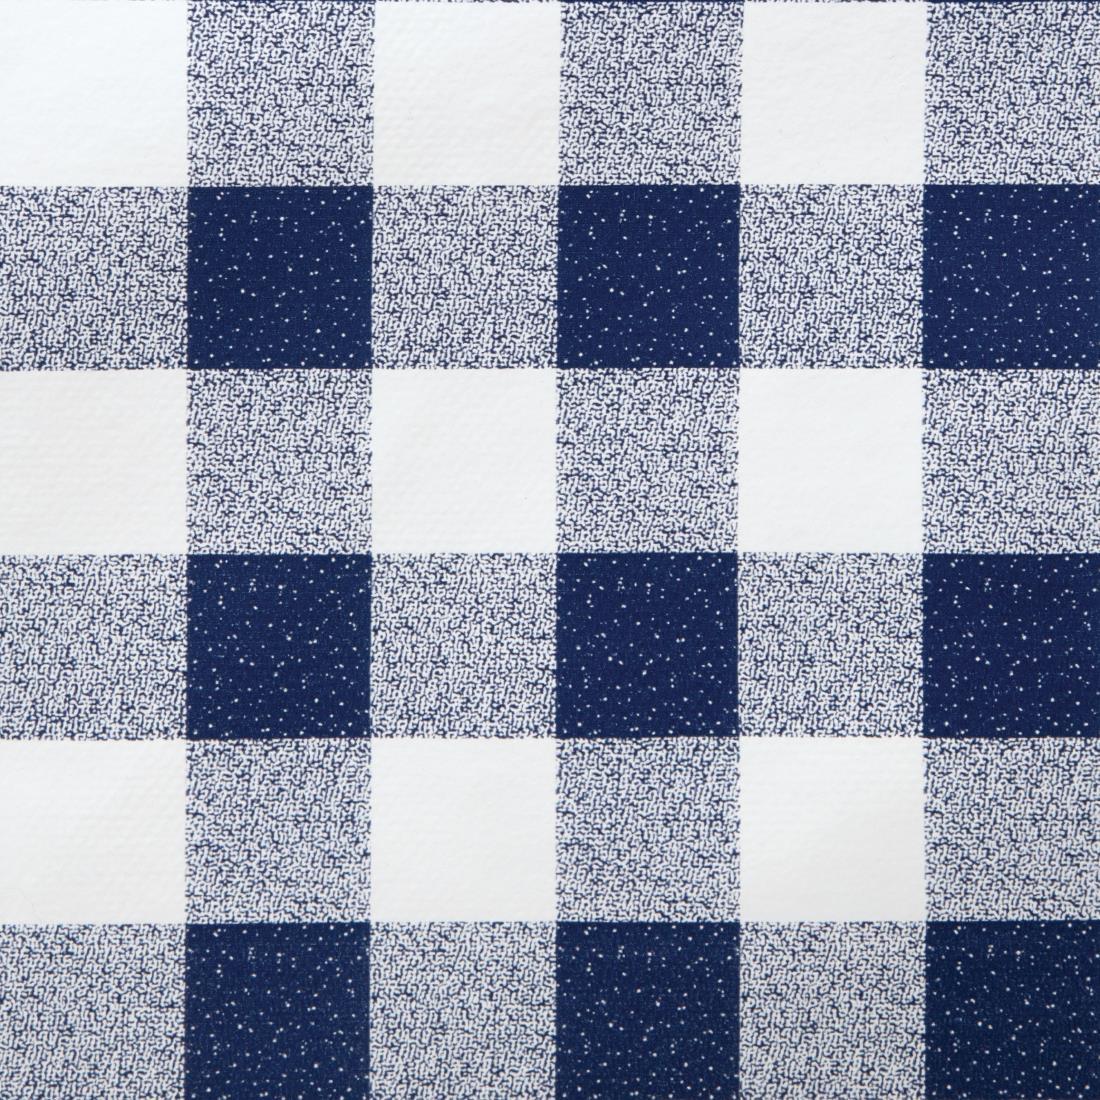 PVC Chequered Tablecloth Blue 54 x 90in - E791  - 2